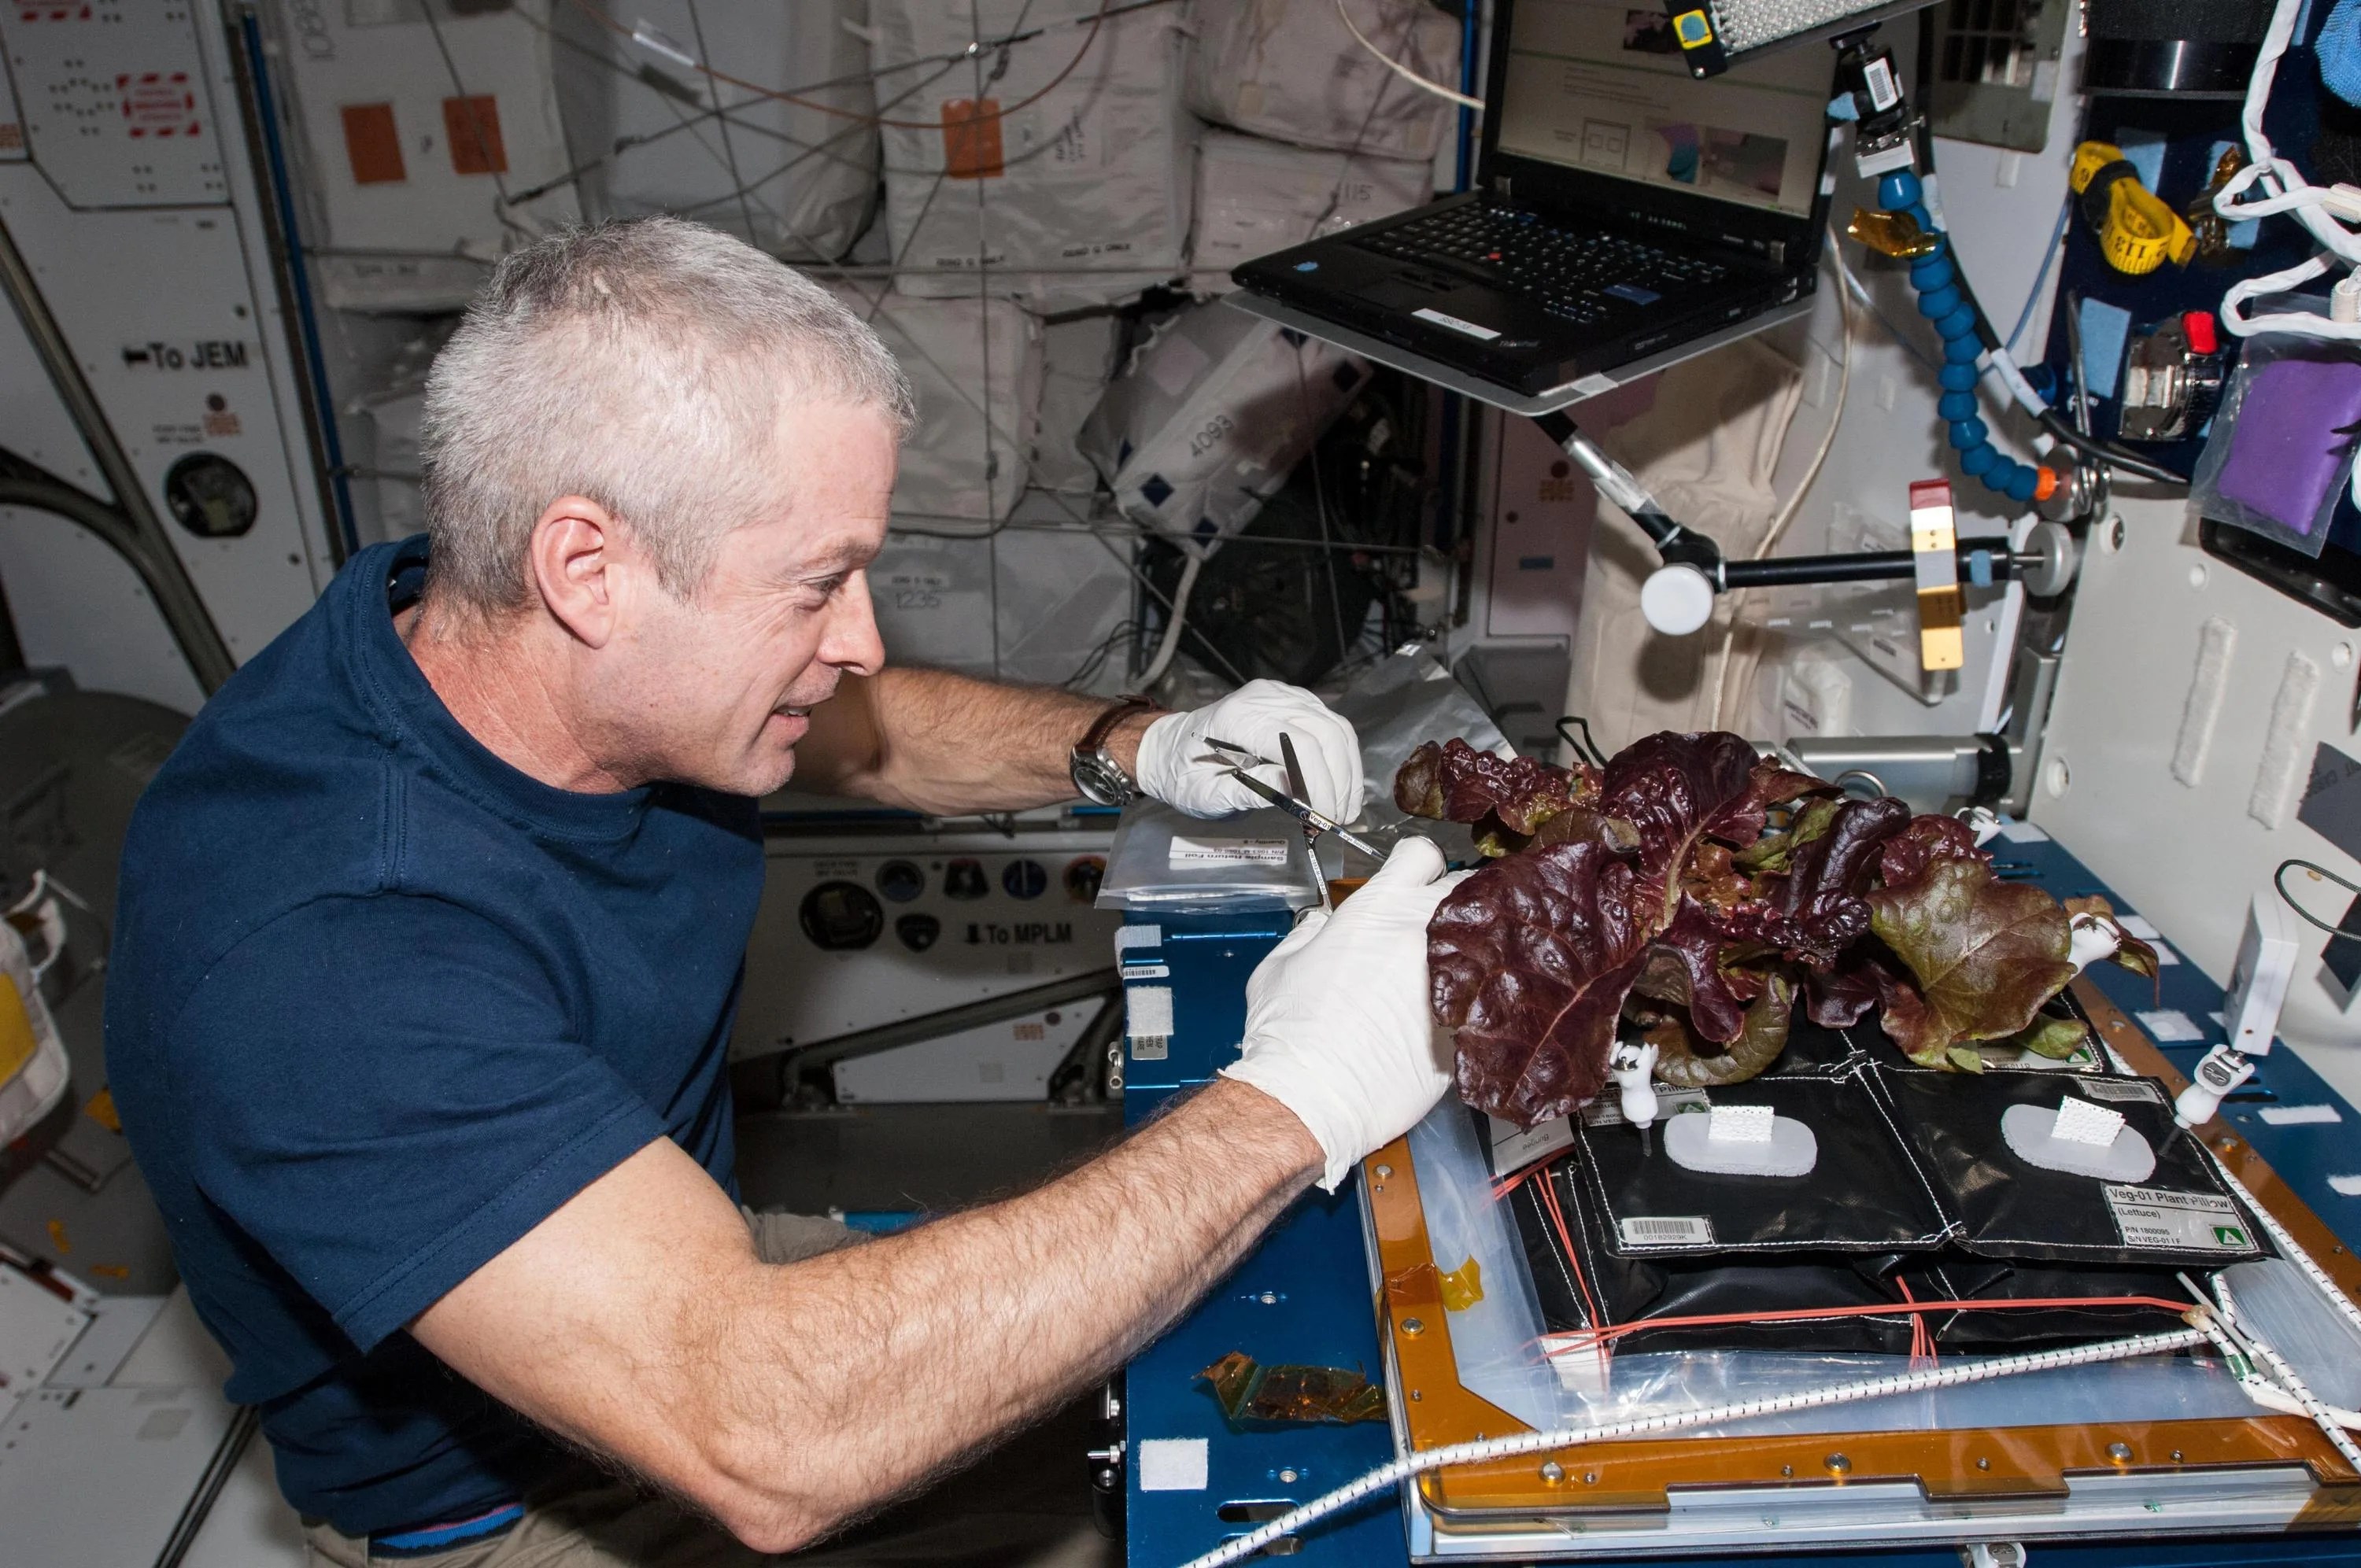 Man in space conducting experiment on plant using test equipment.